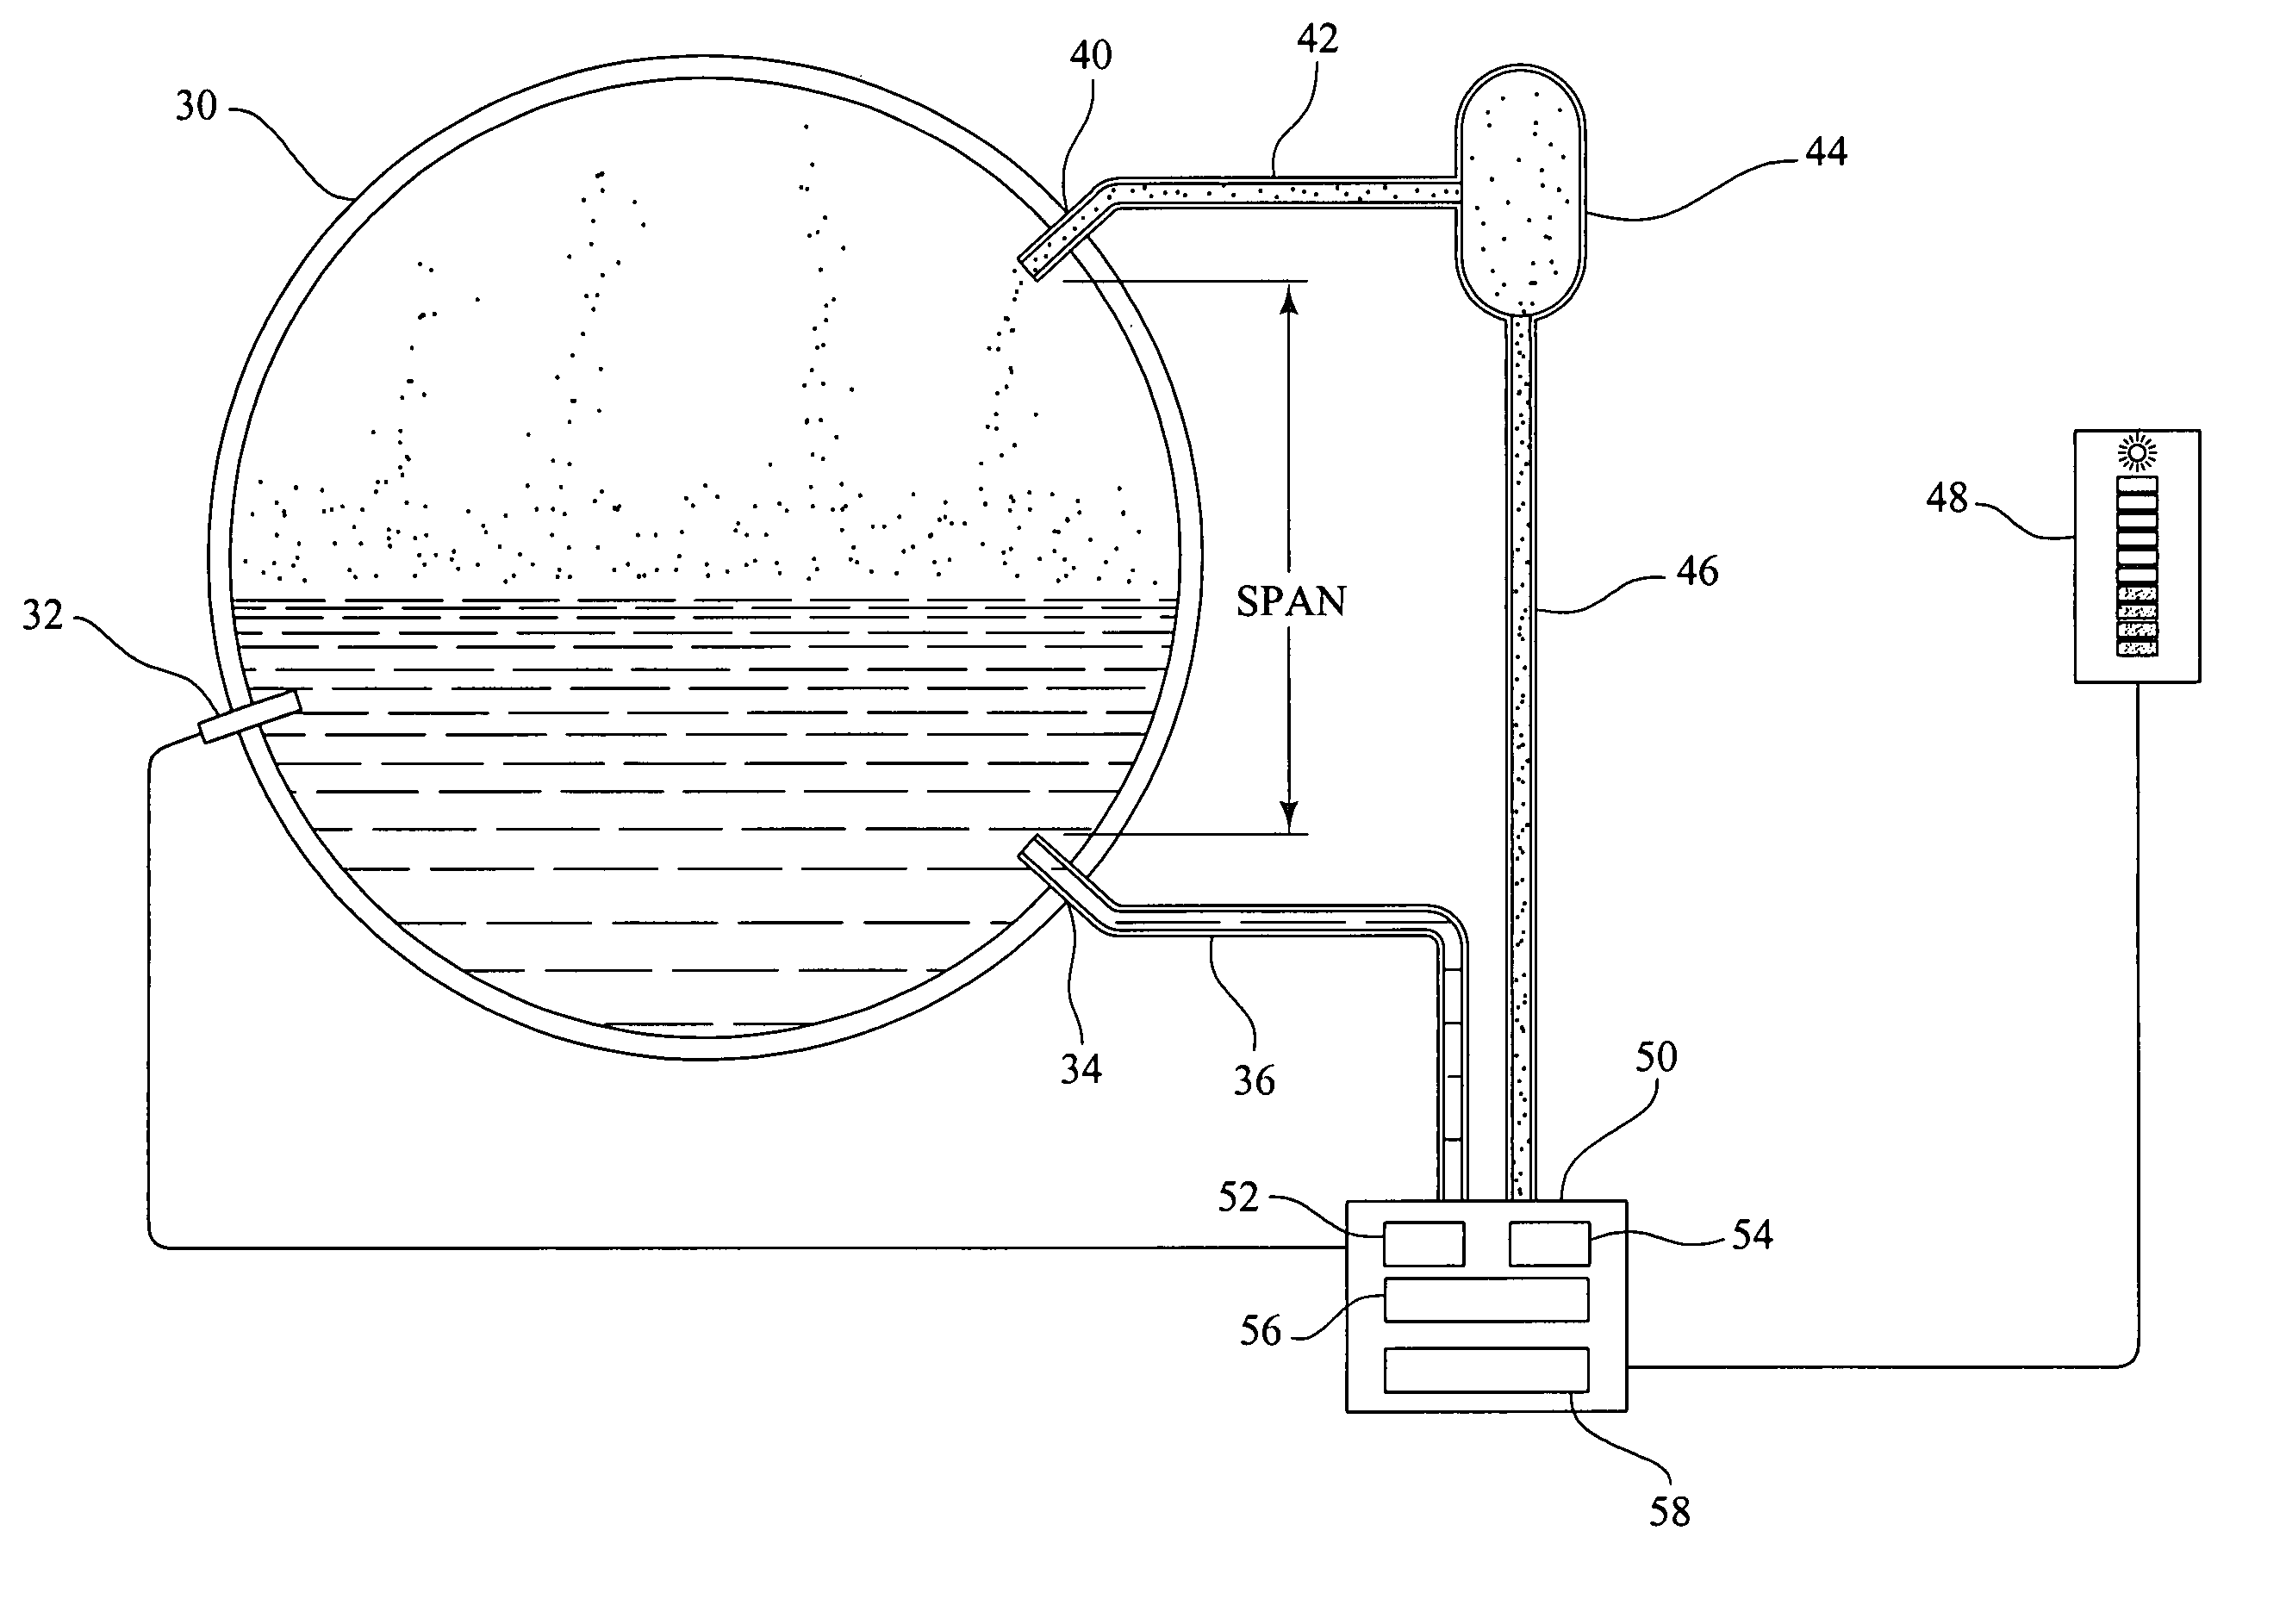 Apparatus and method for determining a liquid level in a steam drum